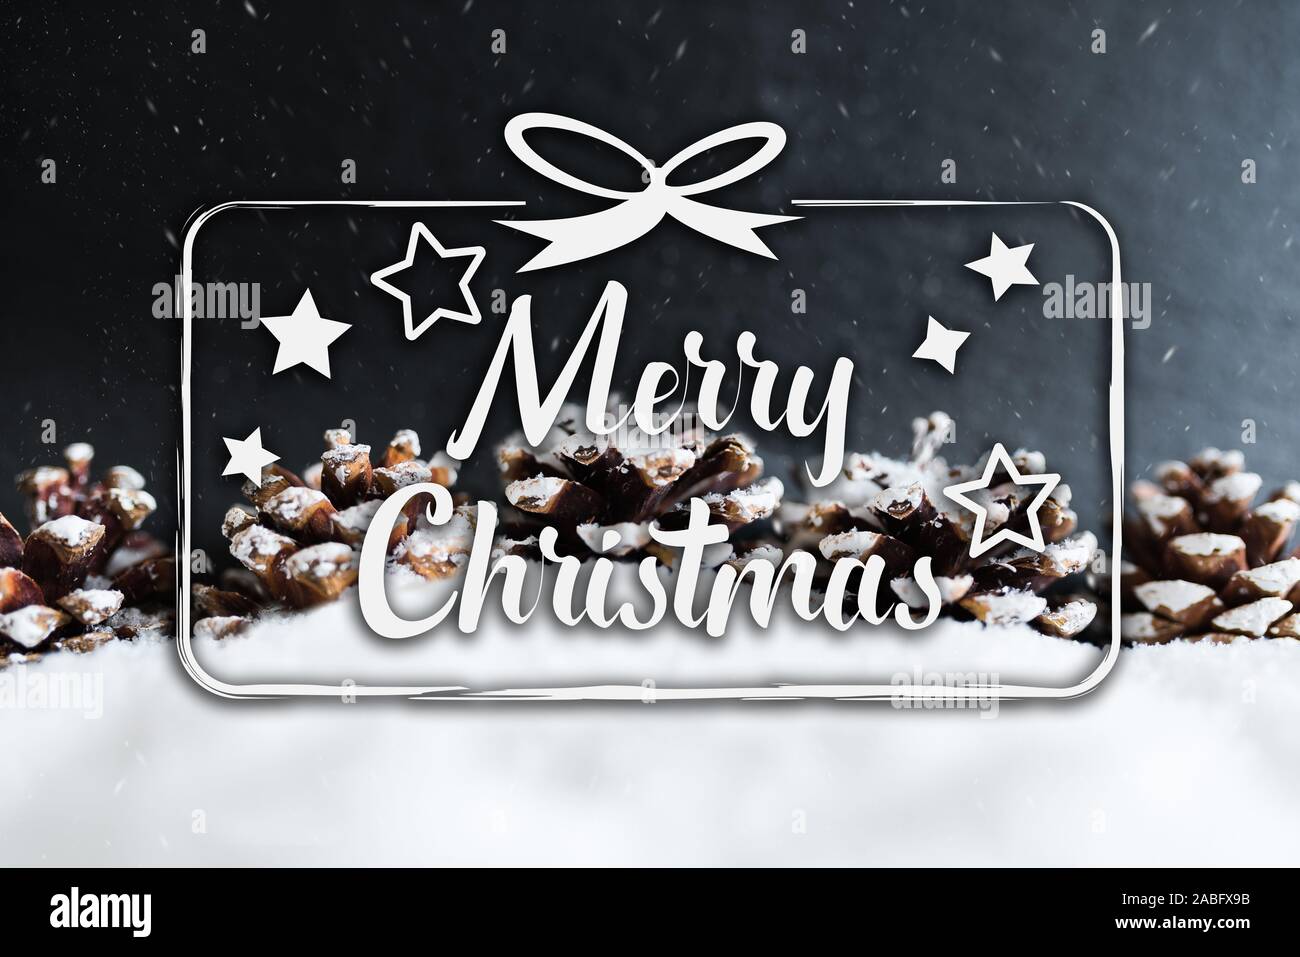 text Merry Christmas against snowy background with pine cones Stock Photo